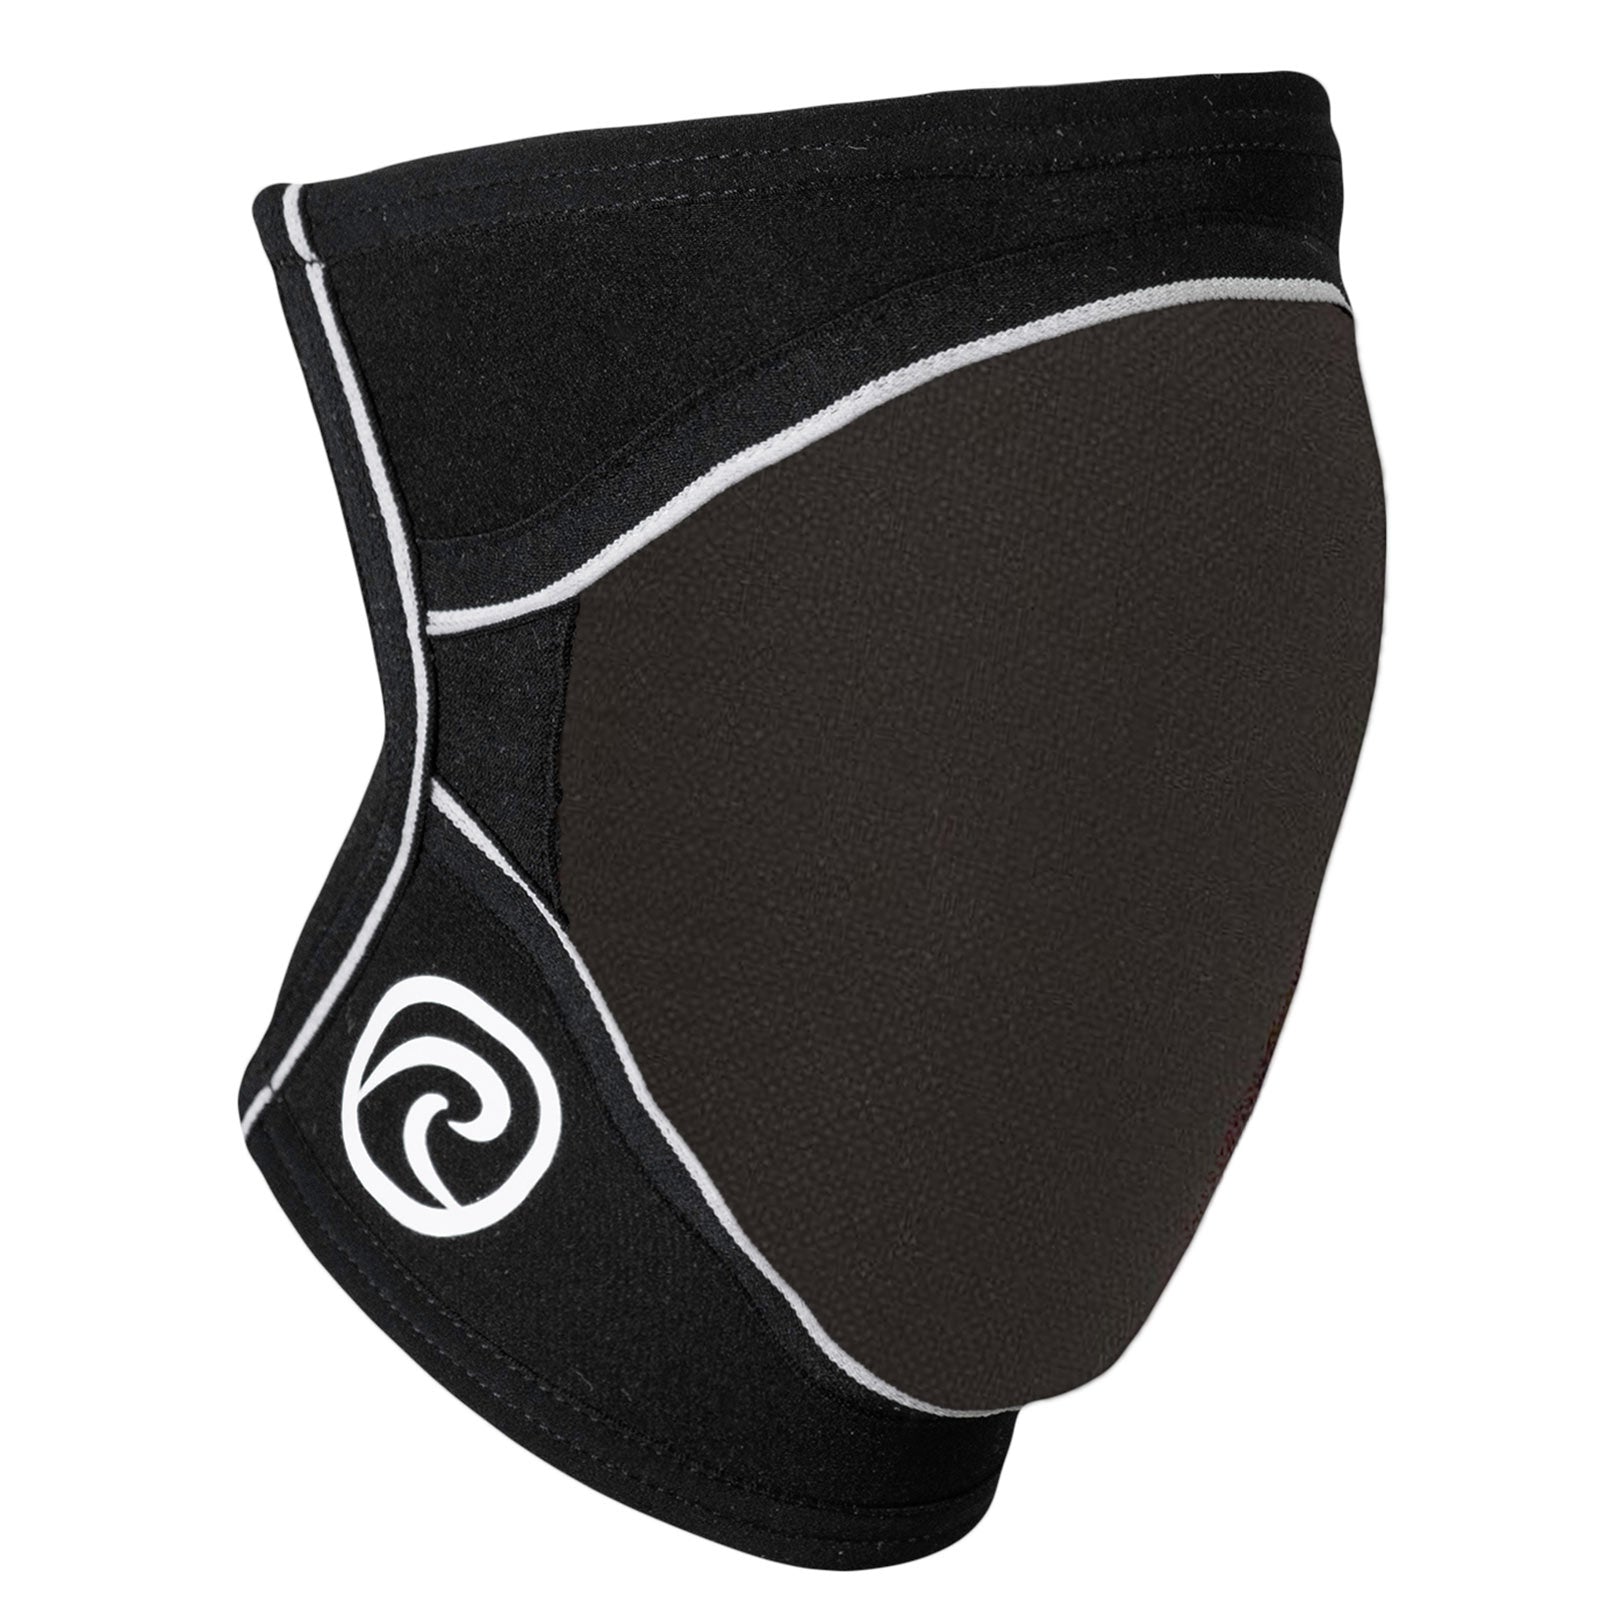 A black padded knee sleeve with a white Rehband logo on the side